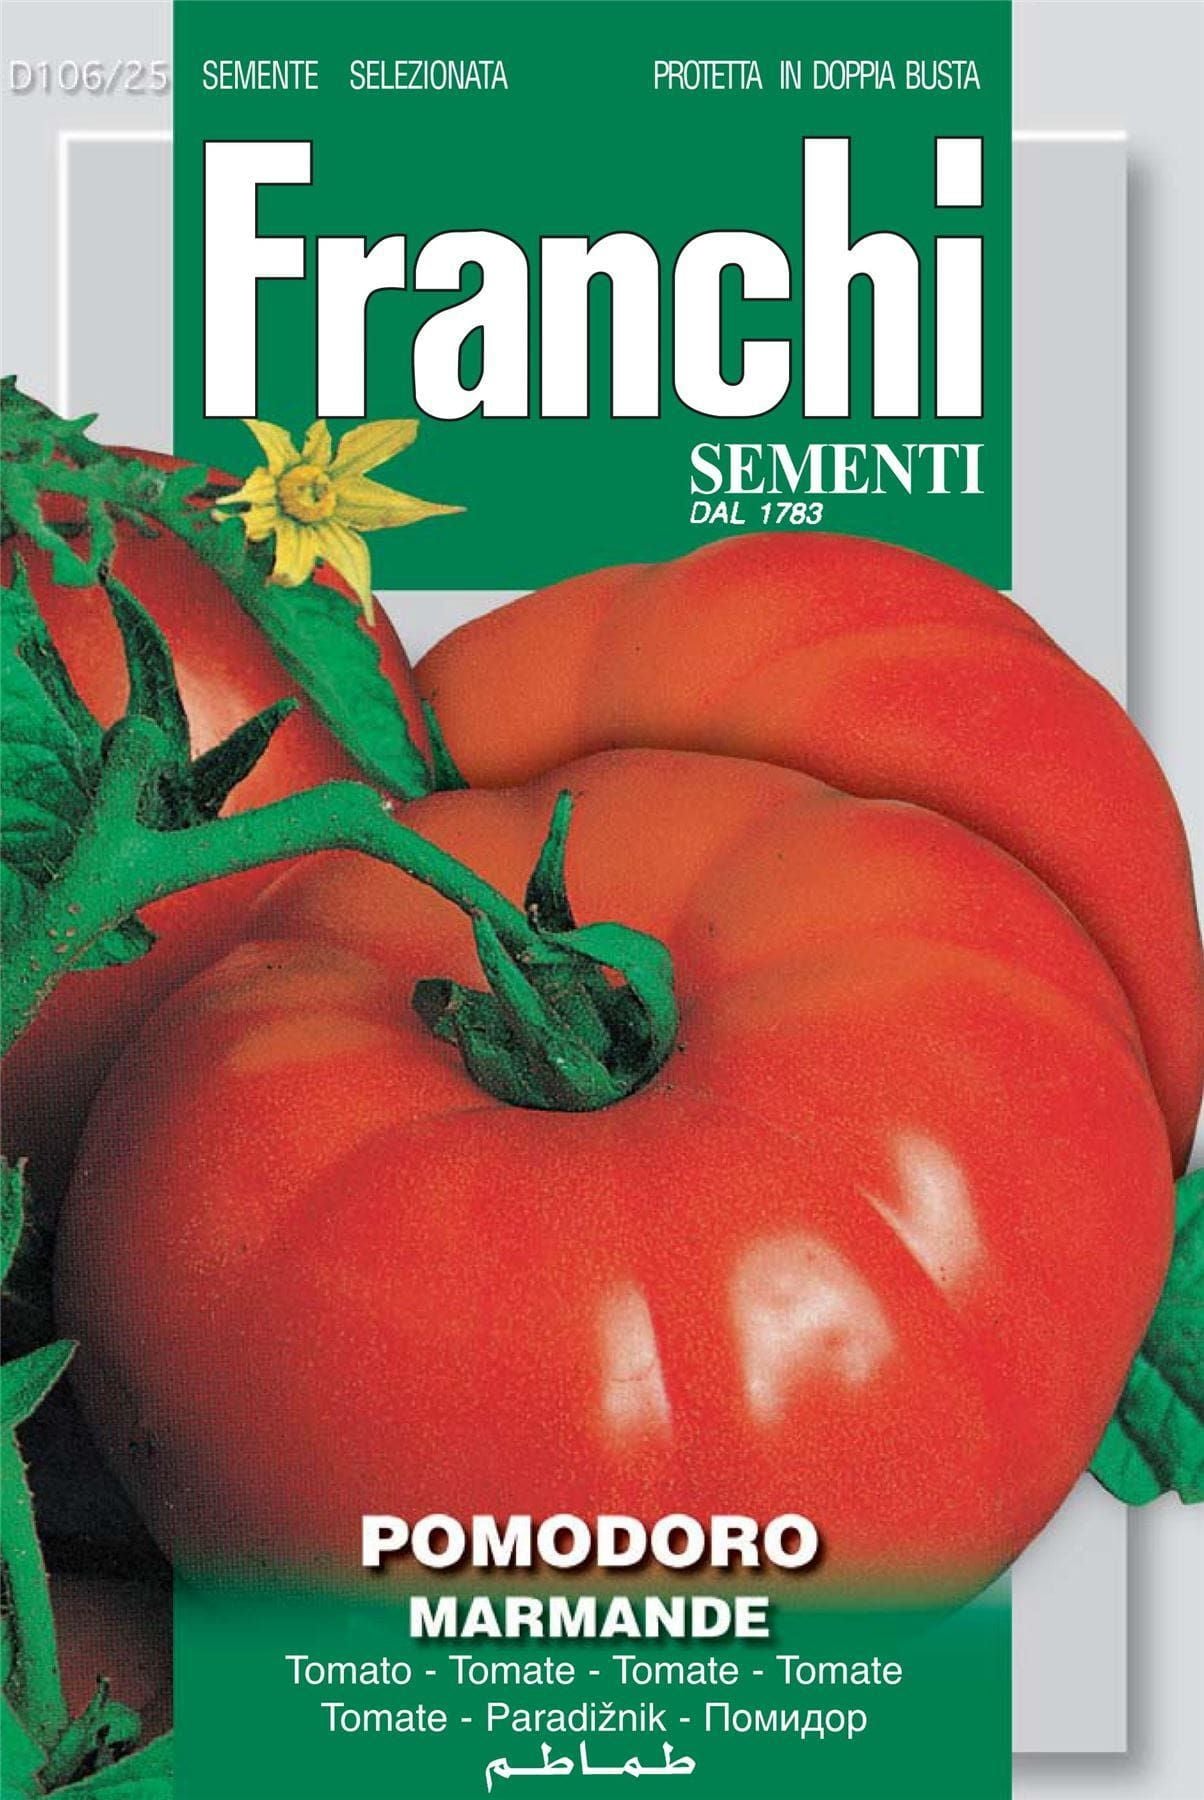 Franchi Seeds of Italy Tomato Marmande Seeds